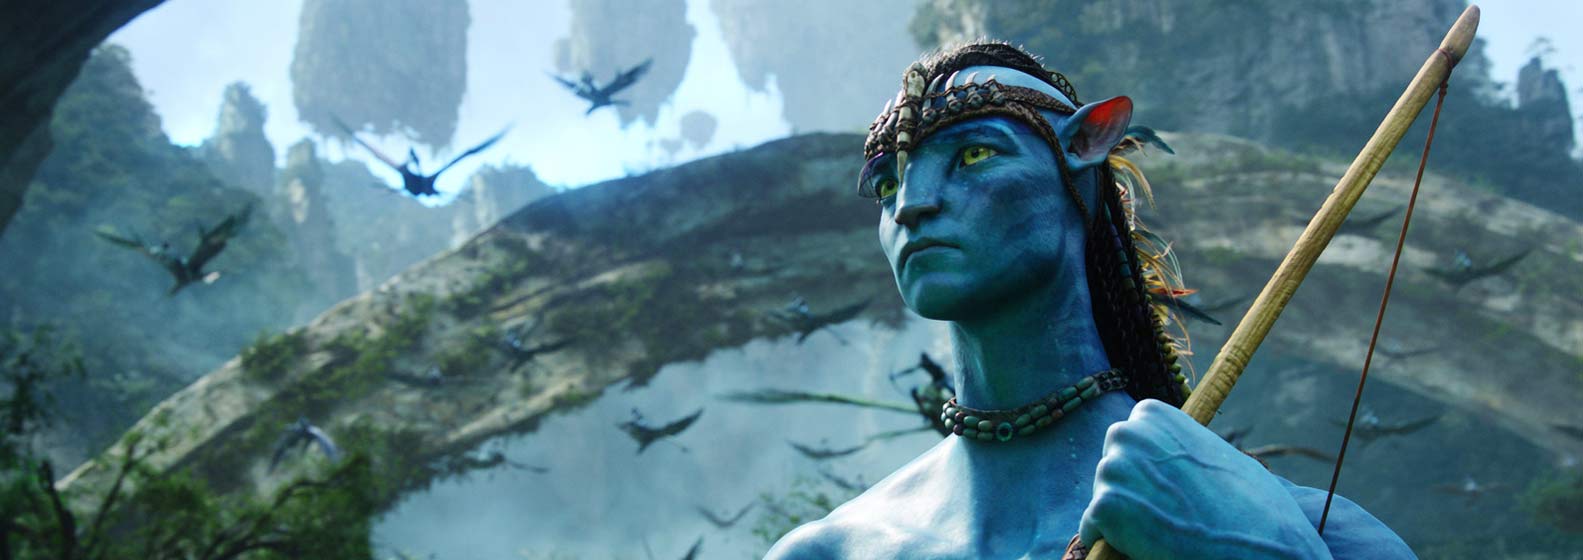 Avatar: The Way of Water - Header Image